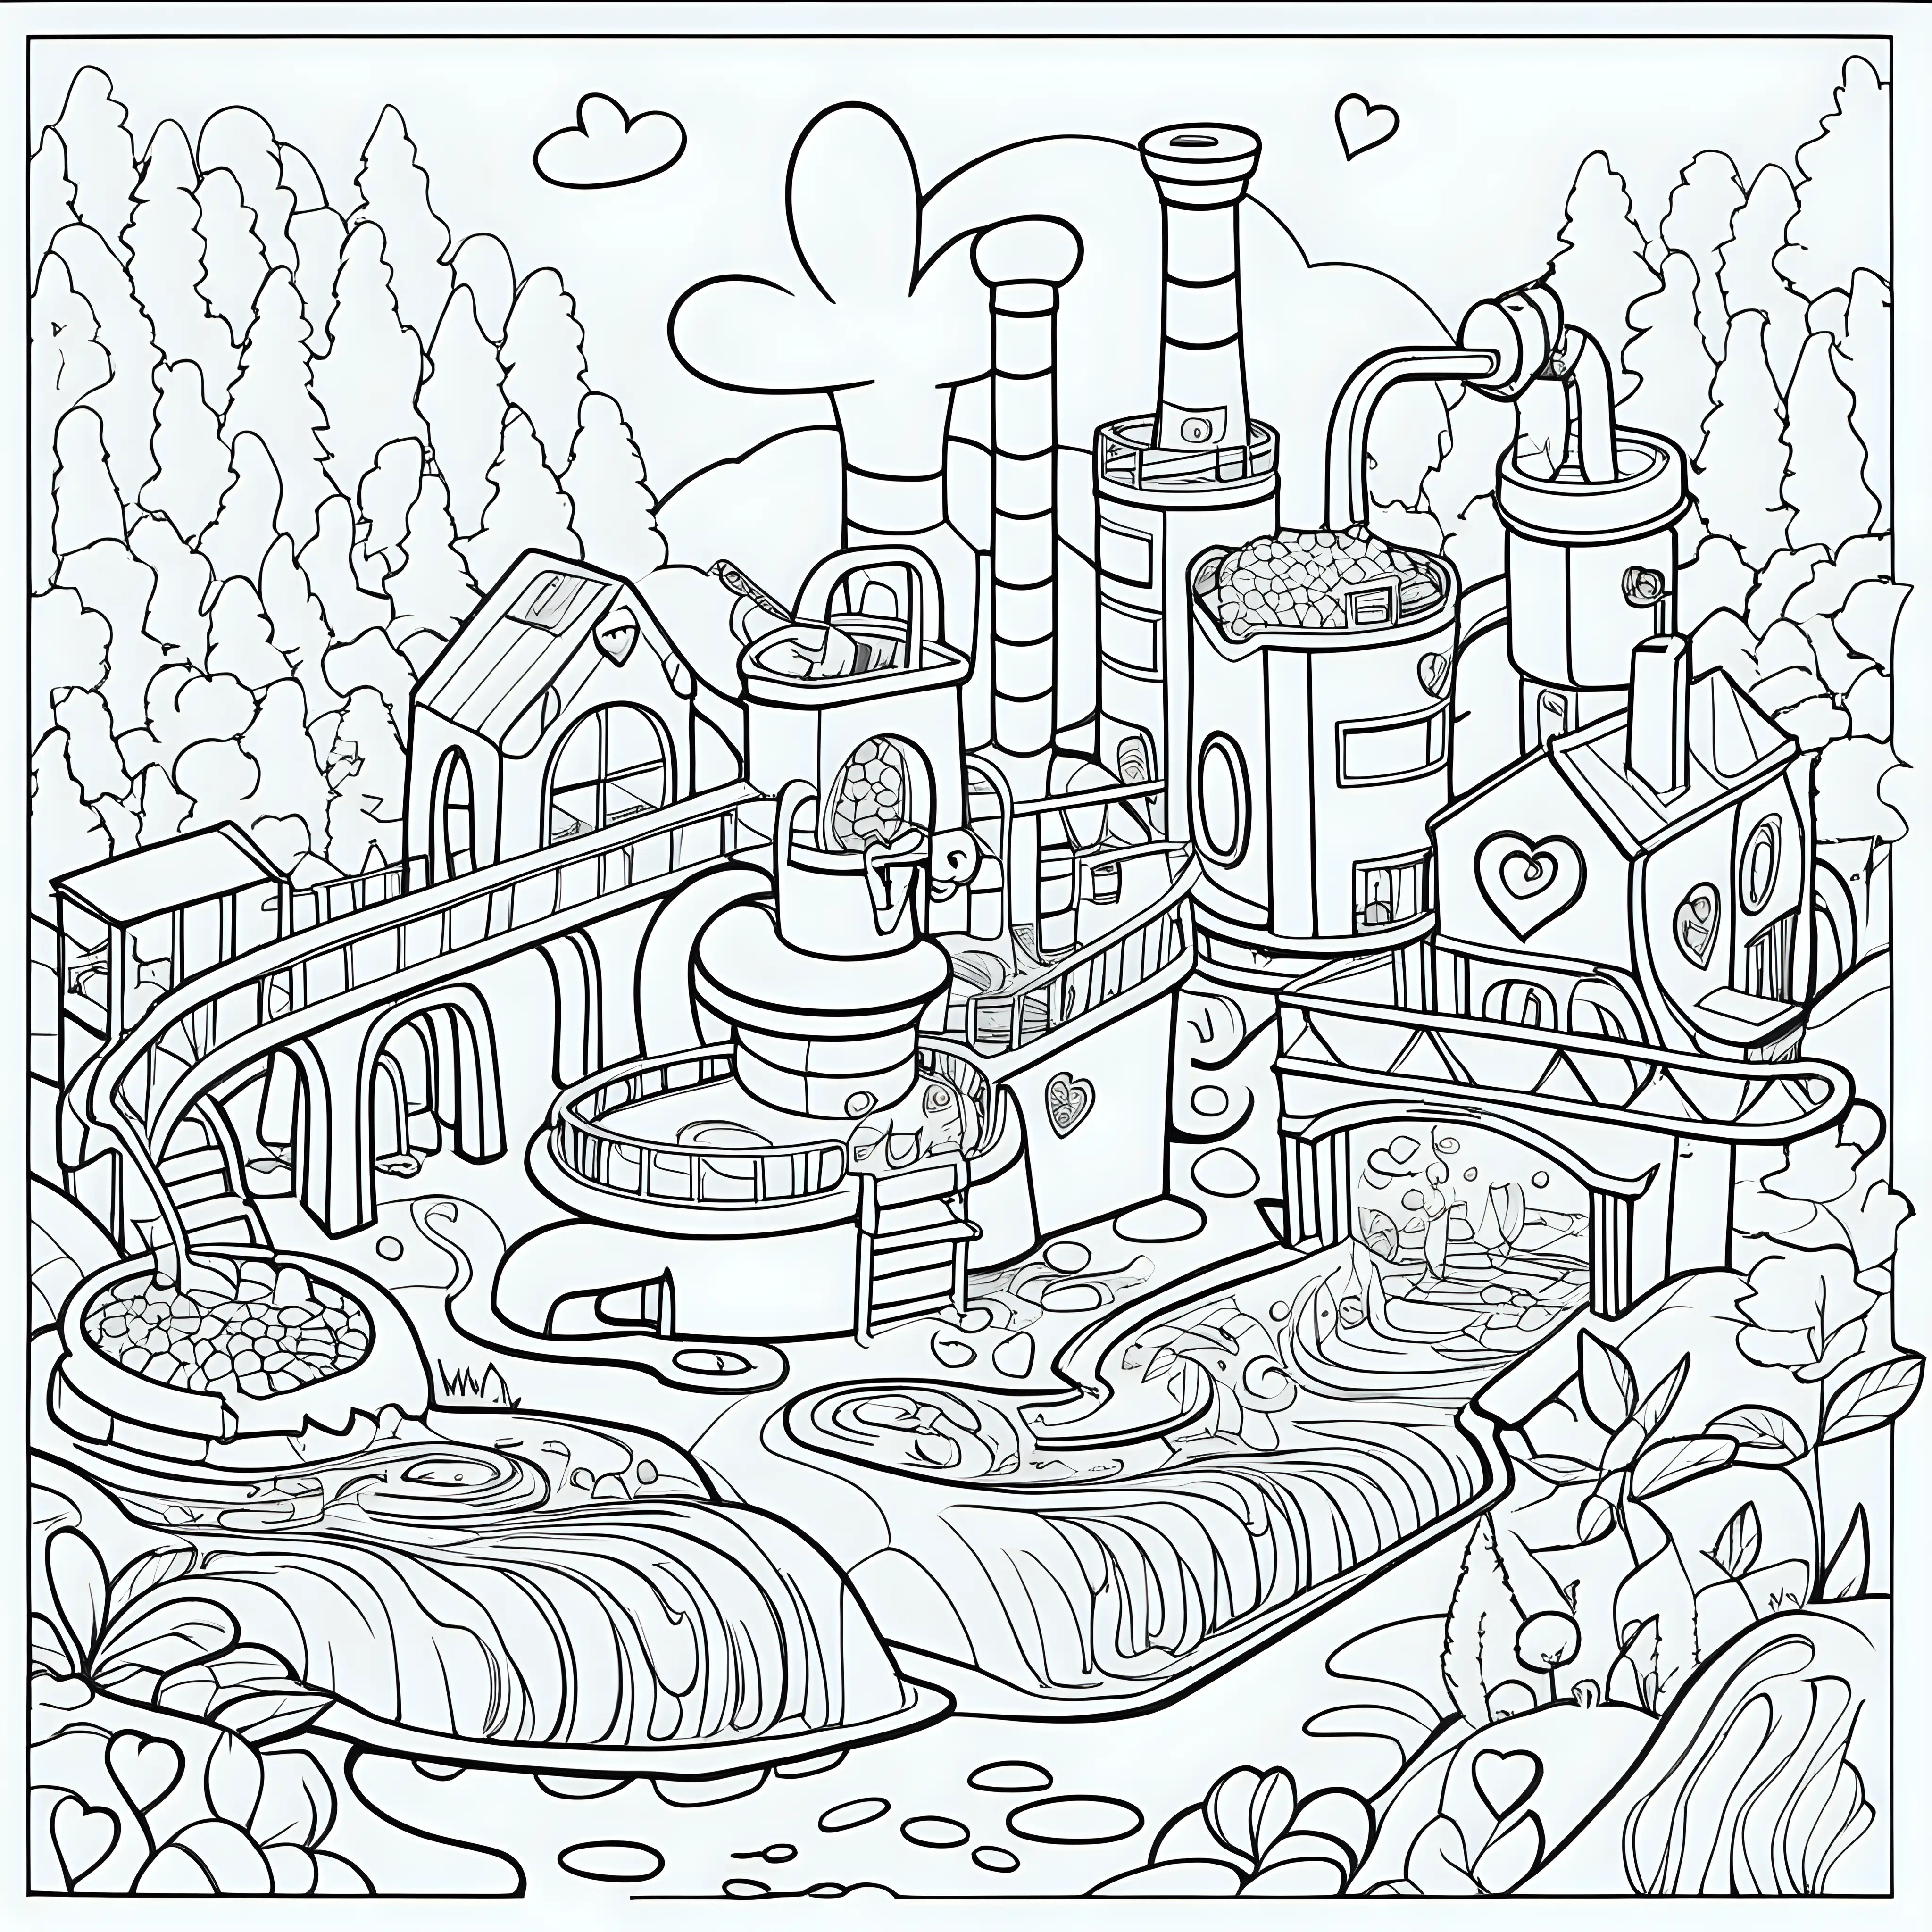 Whimsical Chocolate Factory Coloring Page for Children